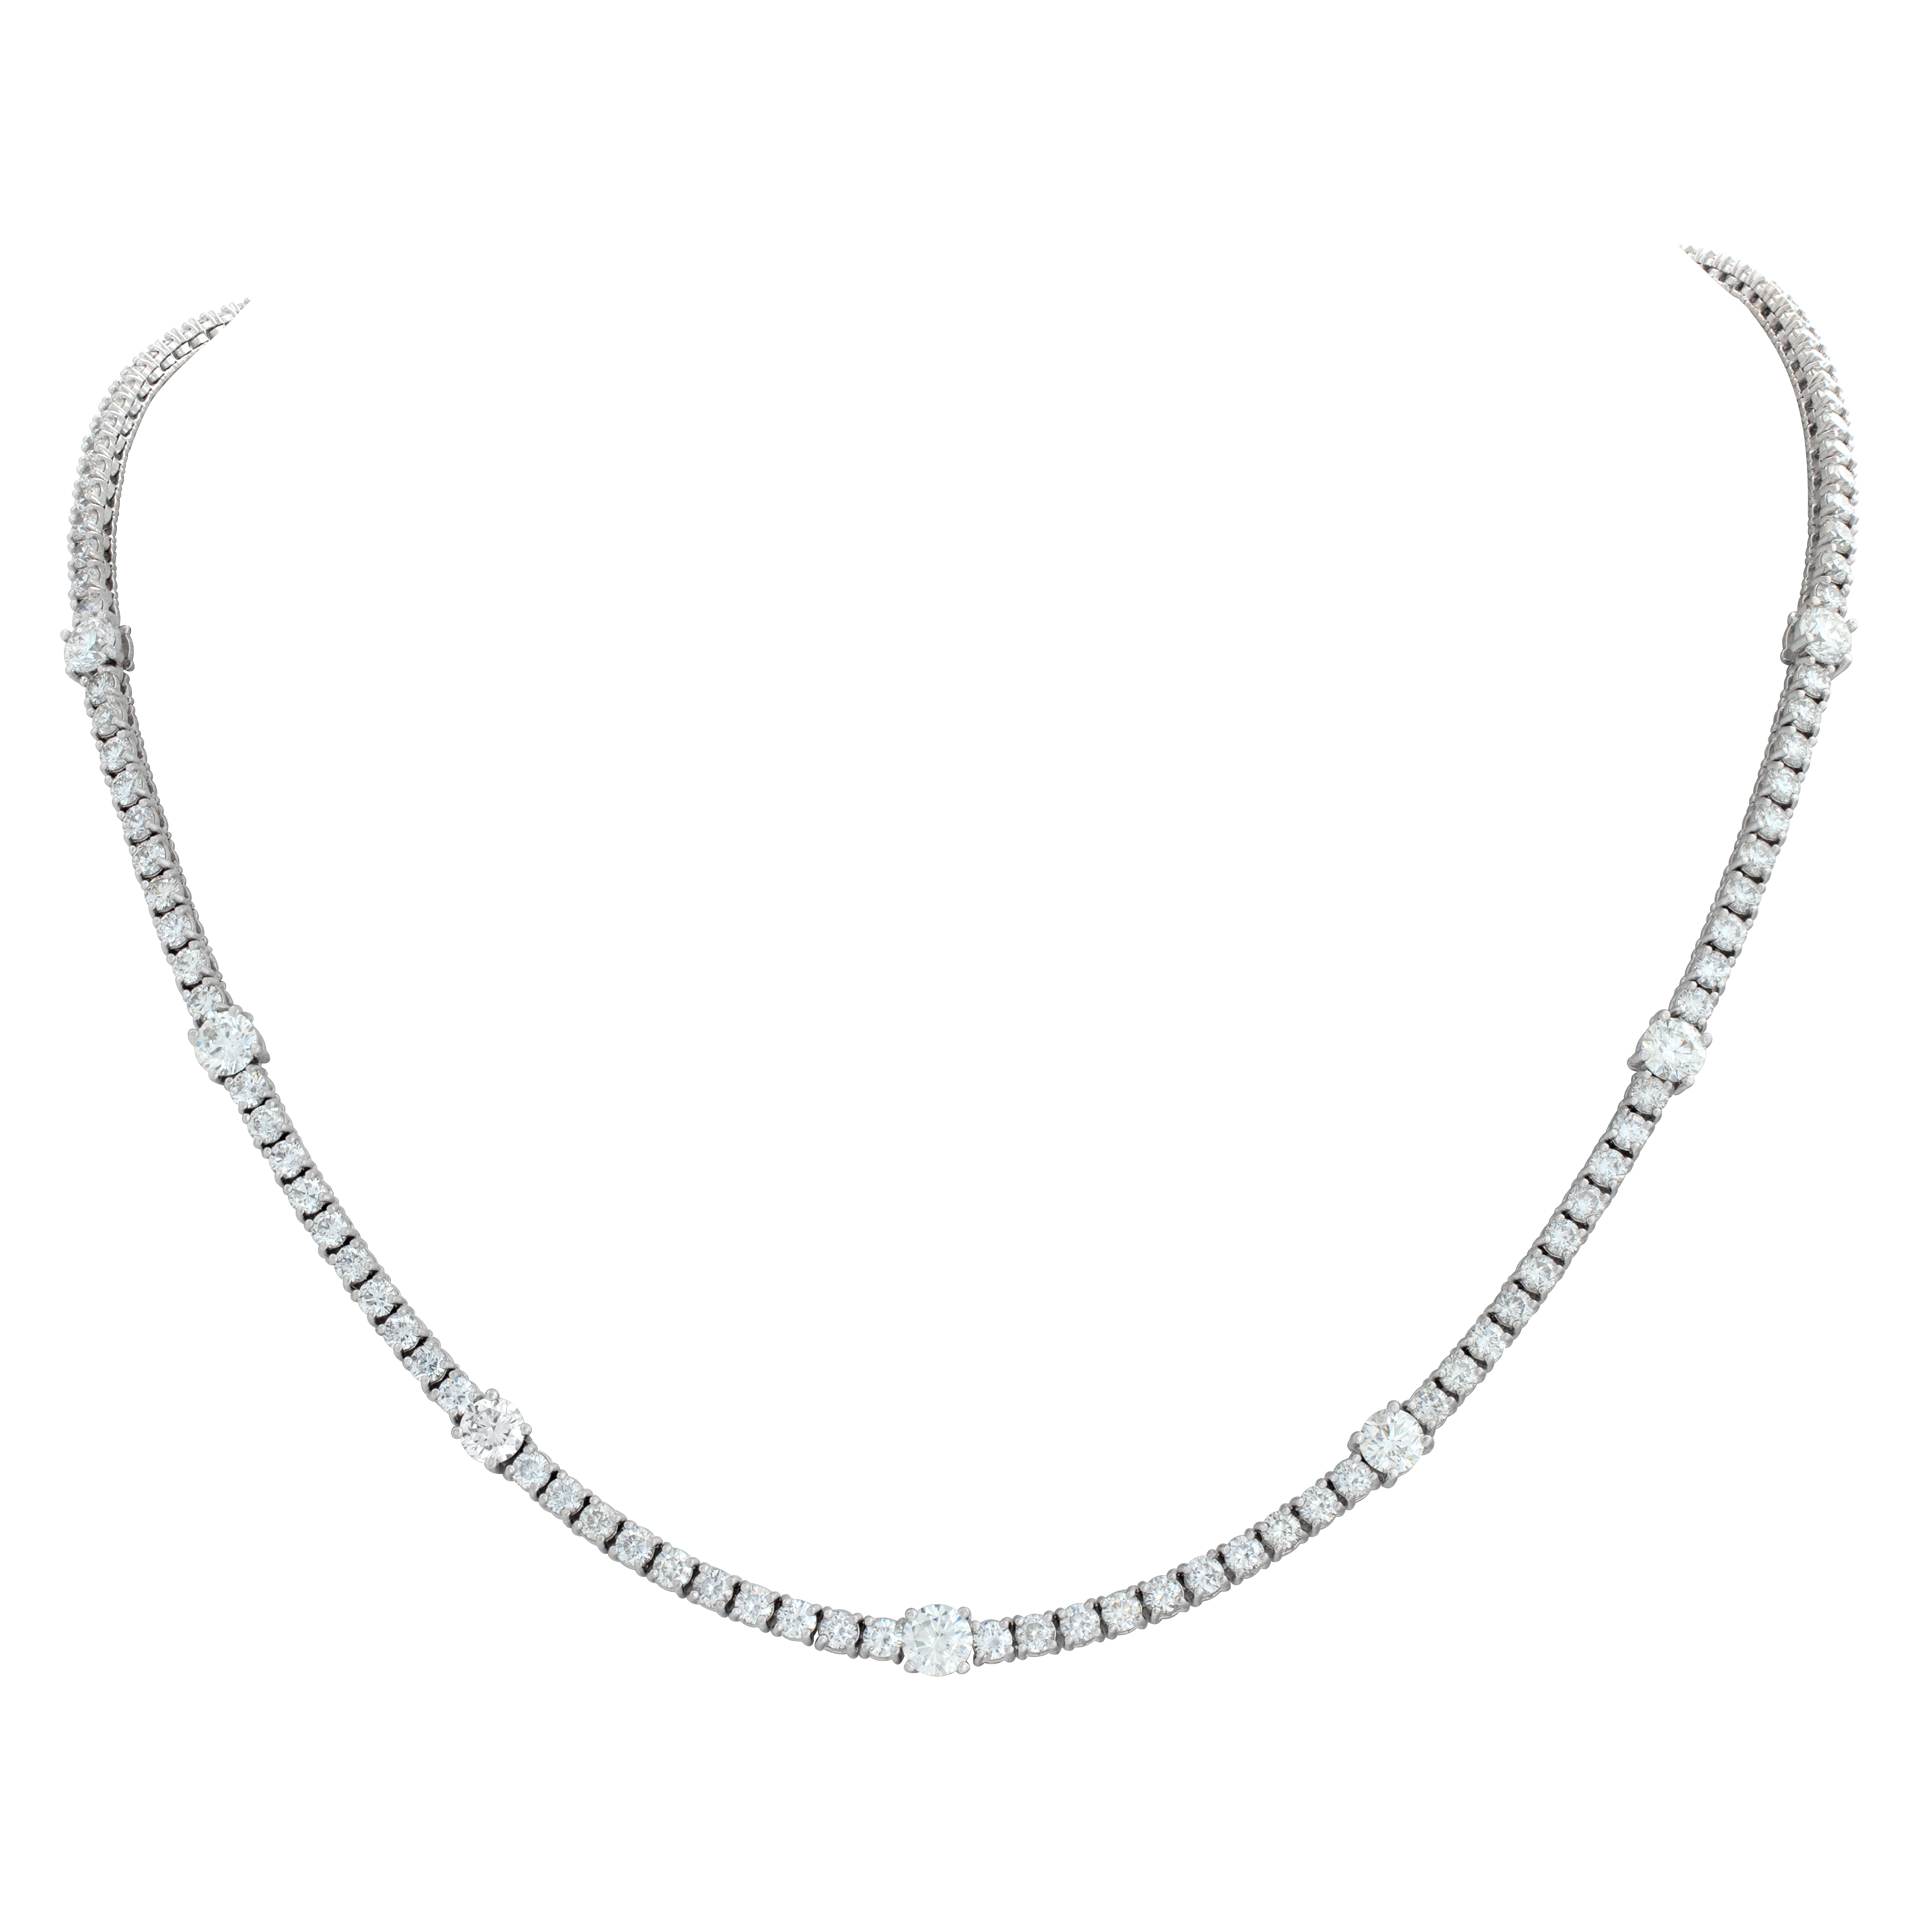 Diamond line necklace in 18k white gold with 10.15 carats in round brilliant cut diamonds image 1